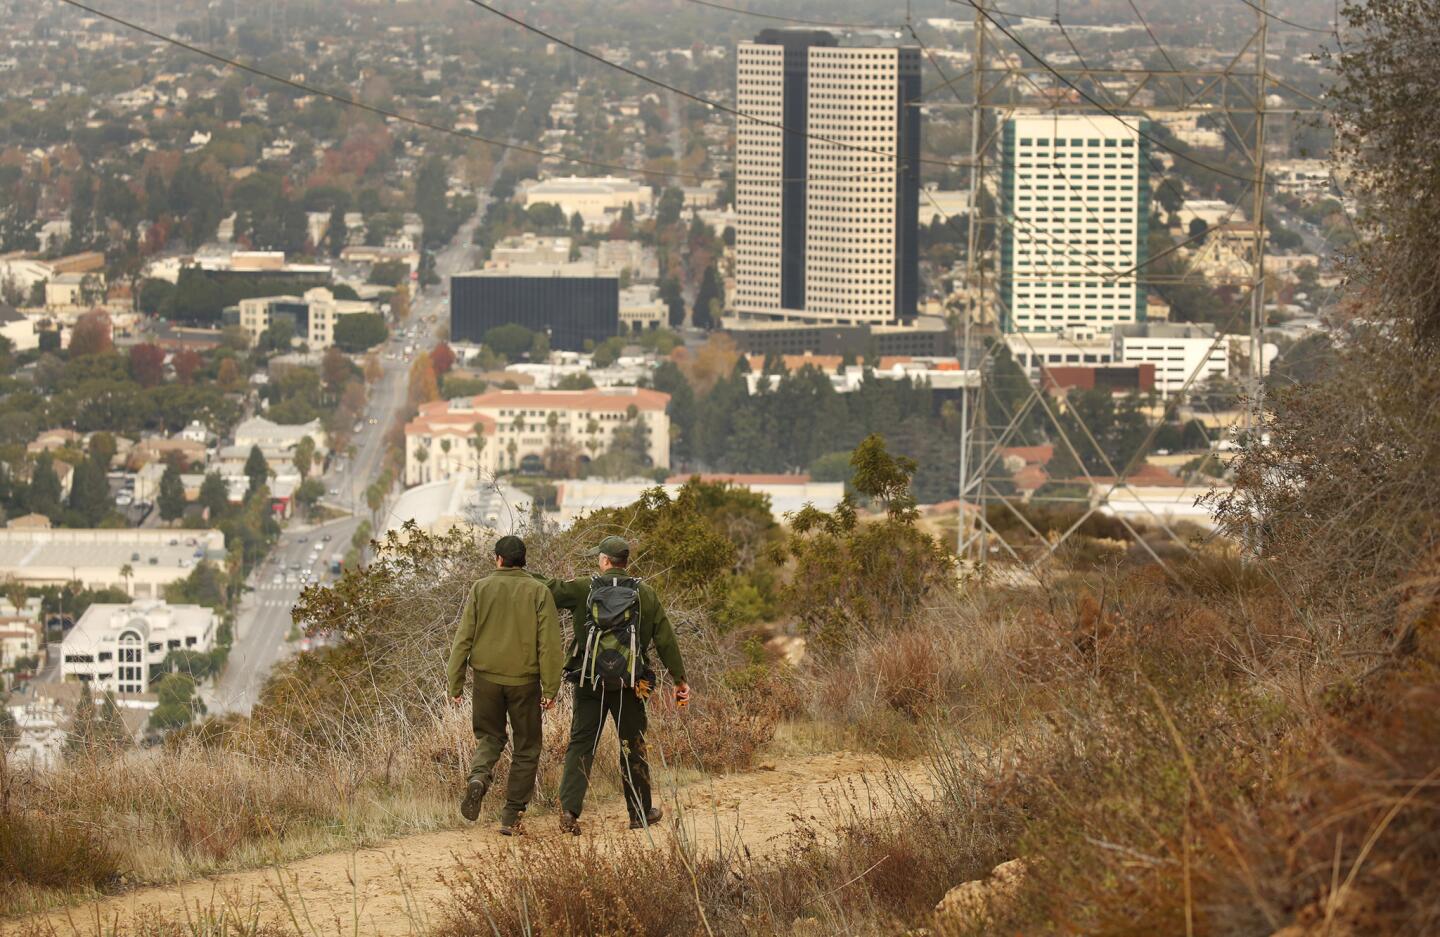 Seth Riley, left, a wildlife ecologist, and Jeff Sikich, a biologist for the National Park Service, walk the trails in the hills above Warner Bros. Studios looking for the remains of a deer likely killed and consumed by Griffith Park's P-22 mountain lion. The pair are using data from a radio collar worn by P-22 to locate the remains.